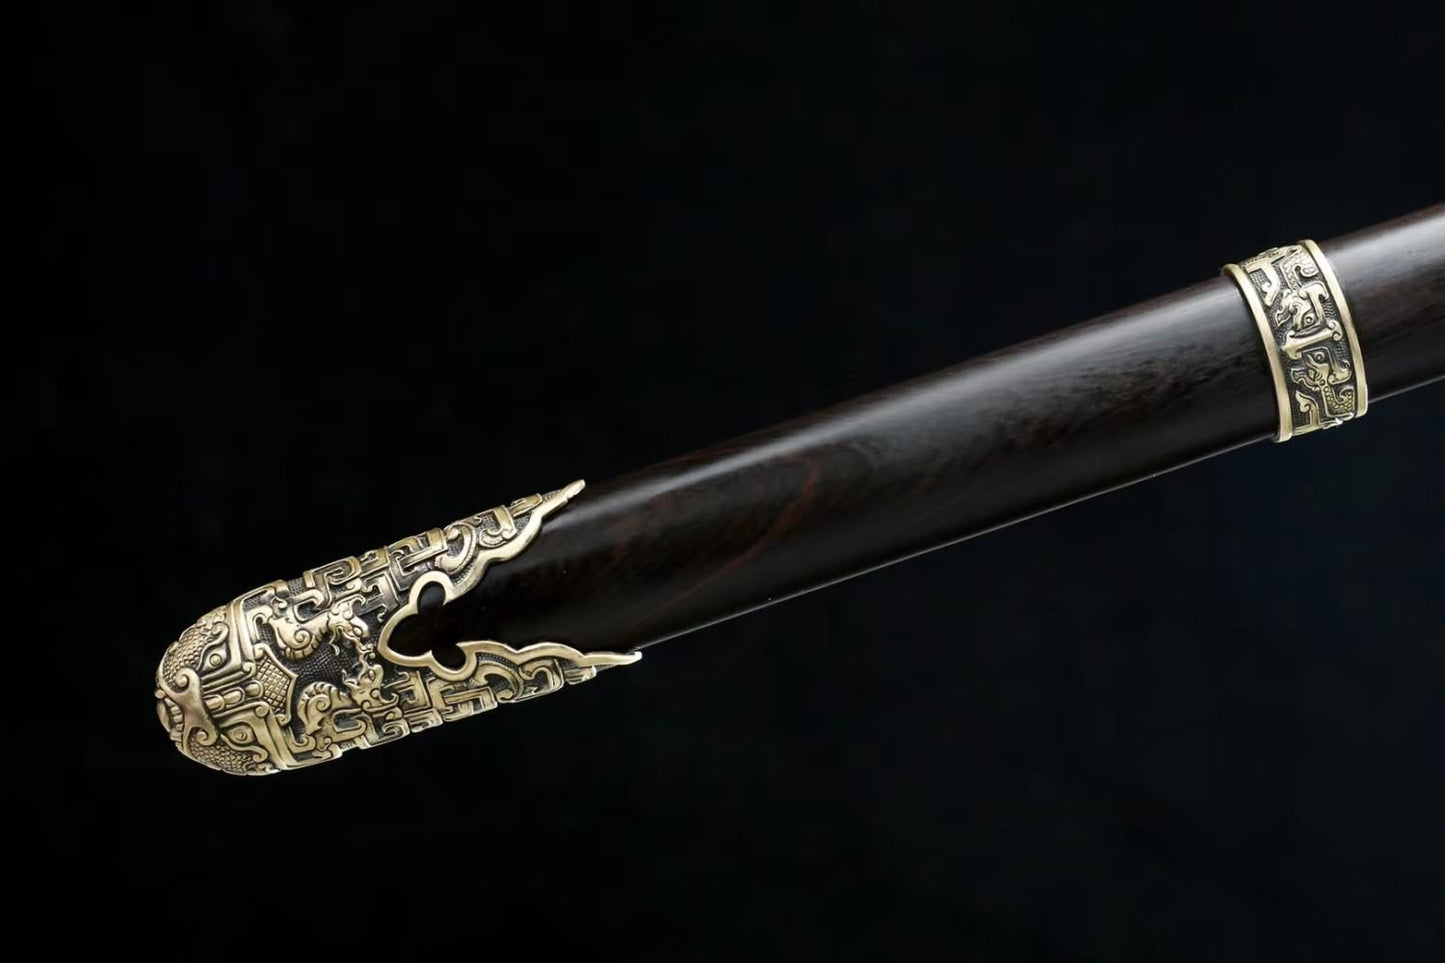 Tang Dao Sword-Hand-Forged Damascus Steel Blade,Ebony Scabbard,Brass Fittings